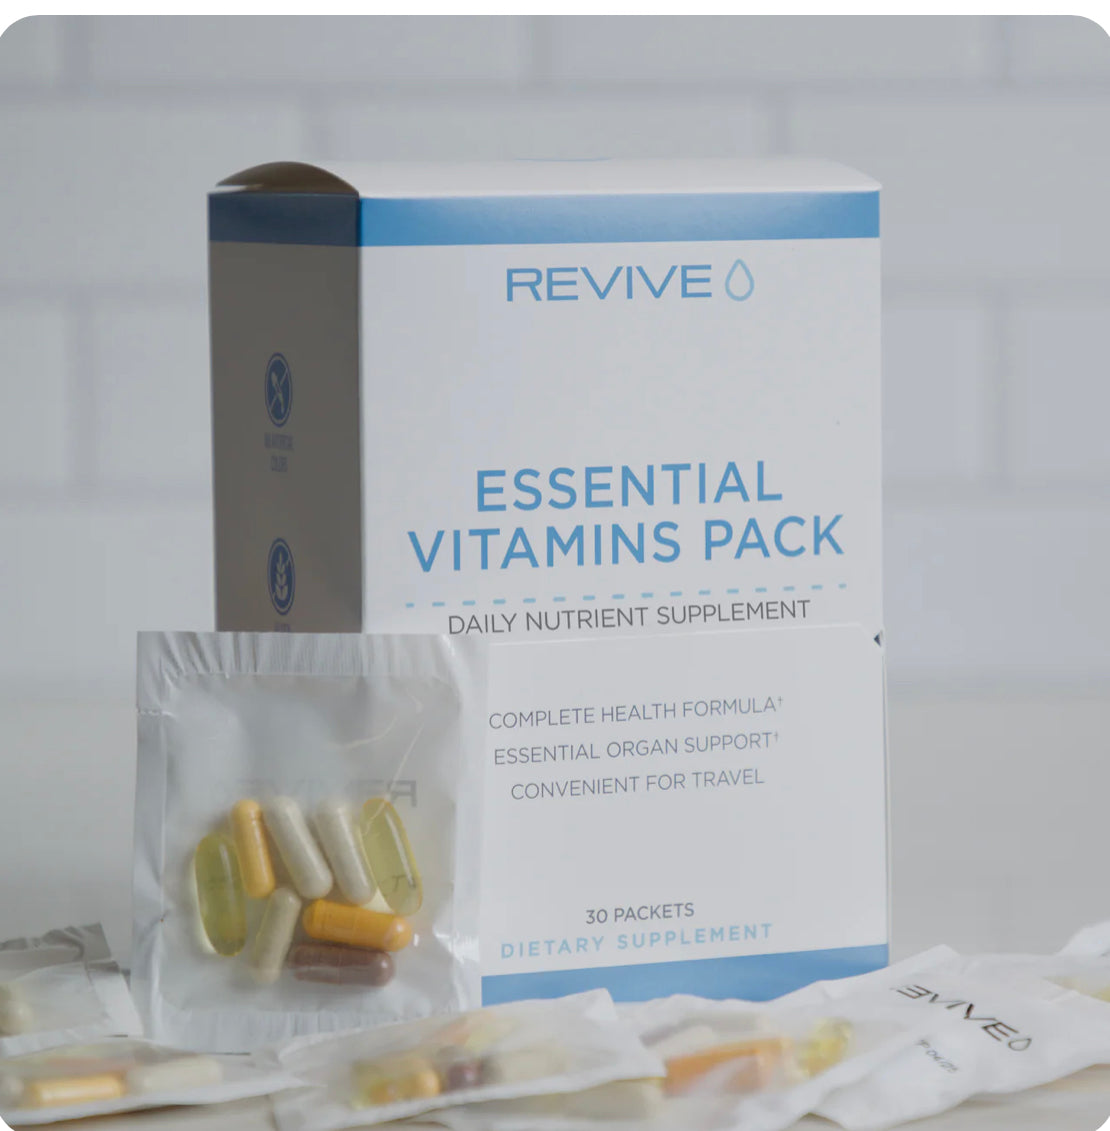 REVIVE Essential Vitamins Pack
All in One Health Formula